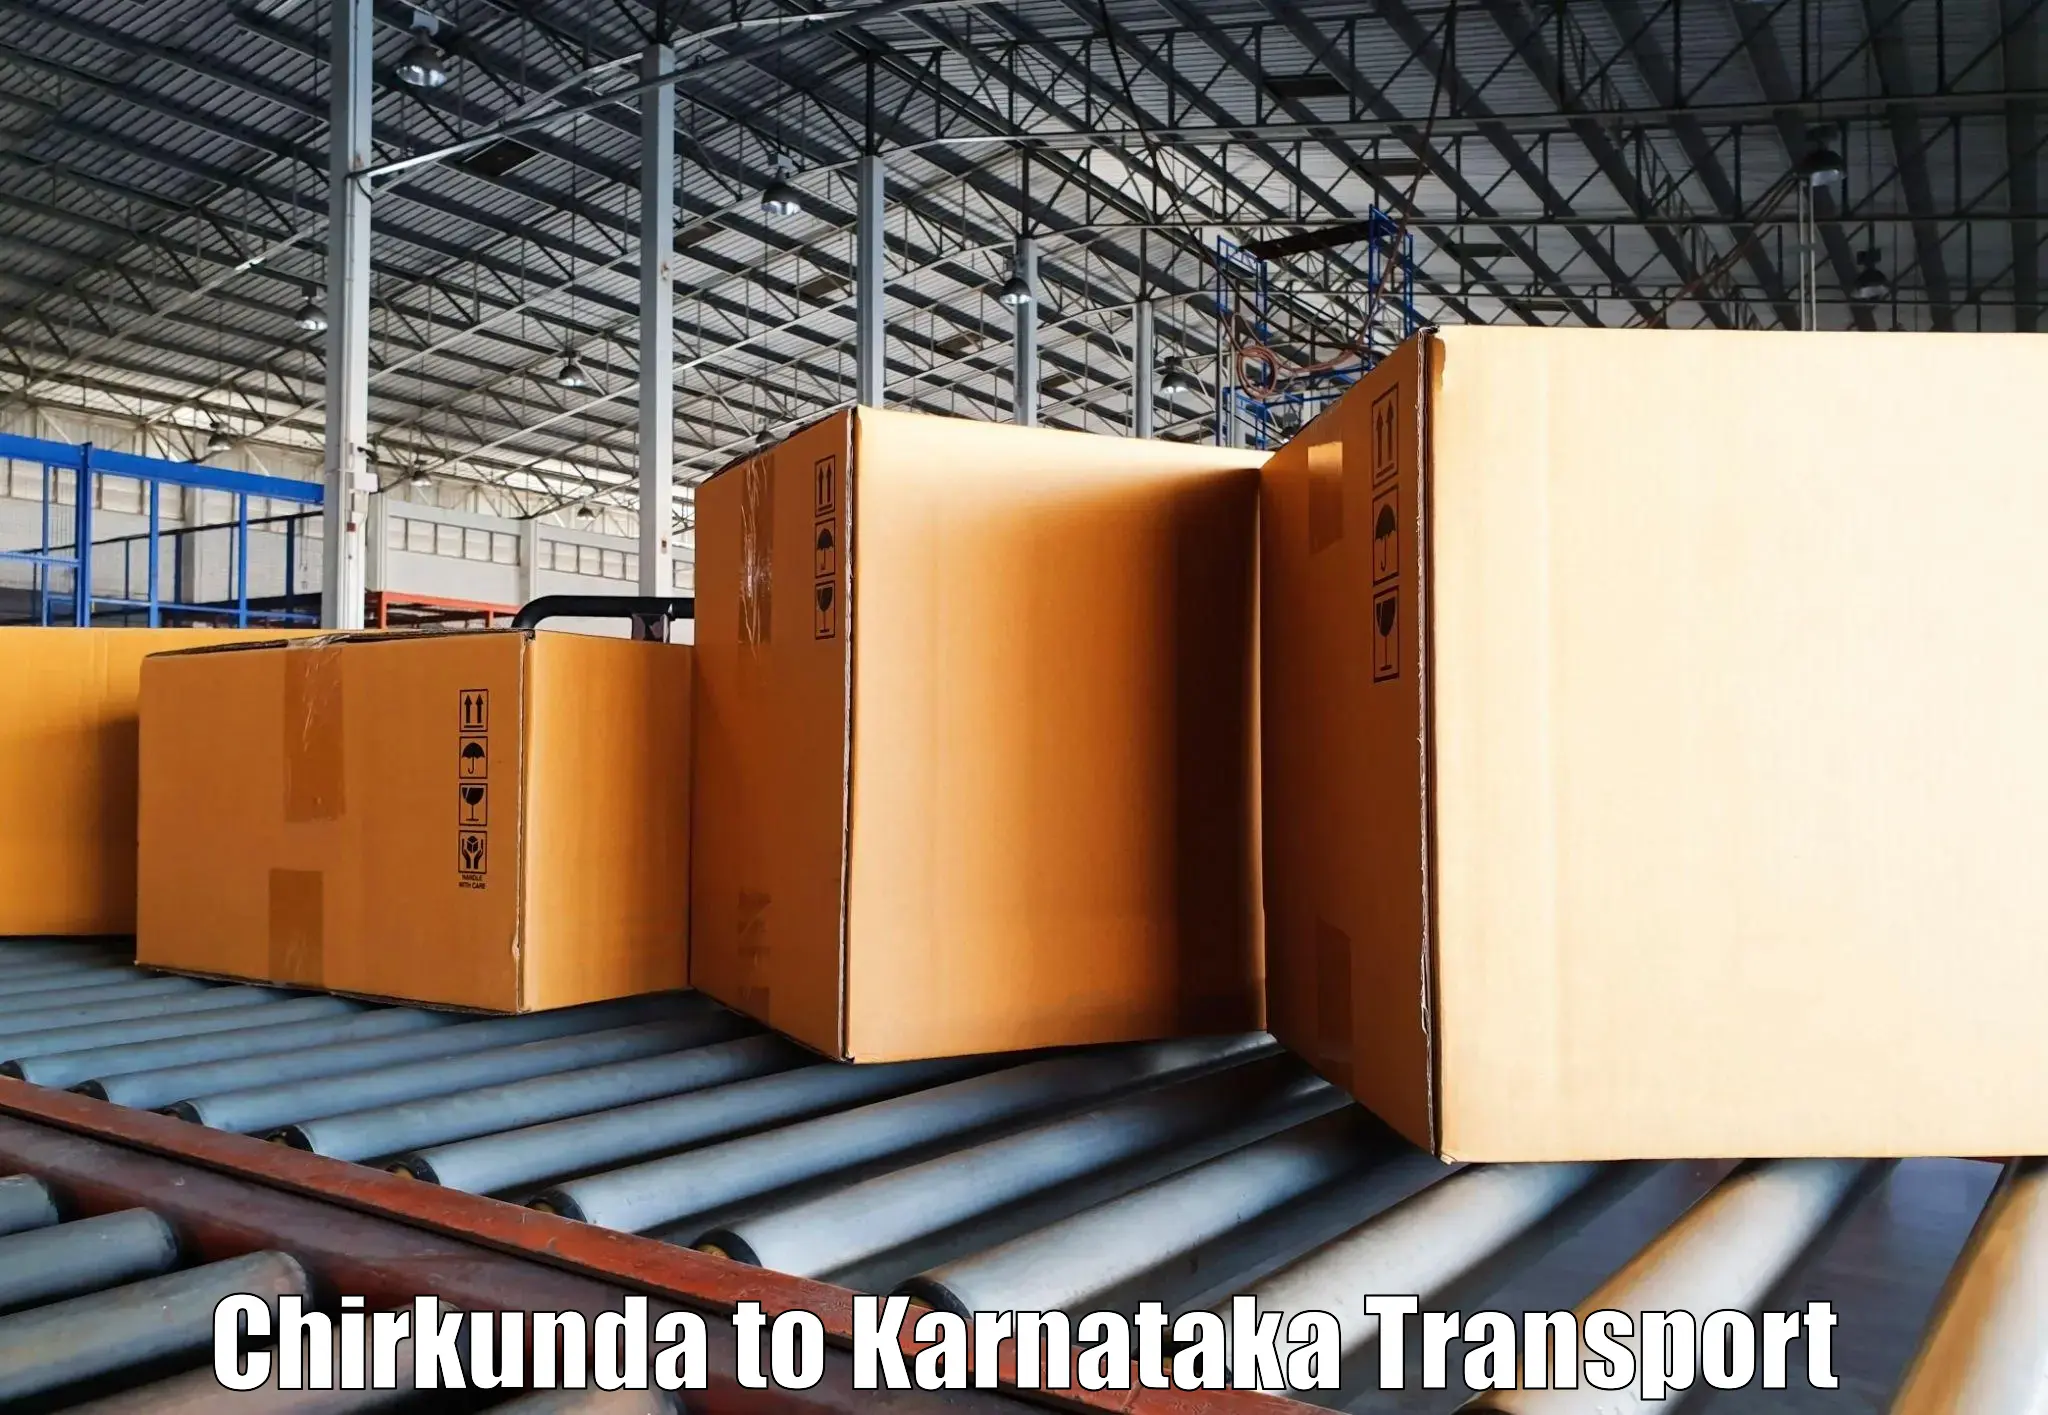 Domestic goods transportation services Chirkunda to Manipal Academy of Higher Education